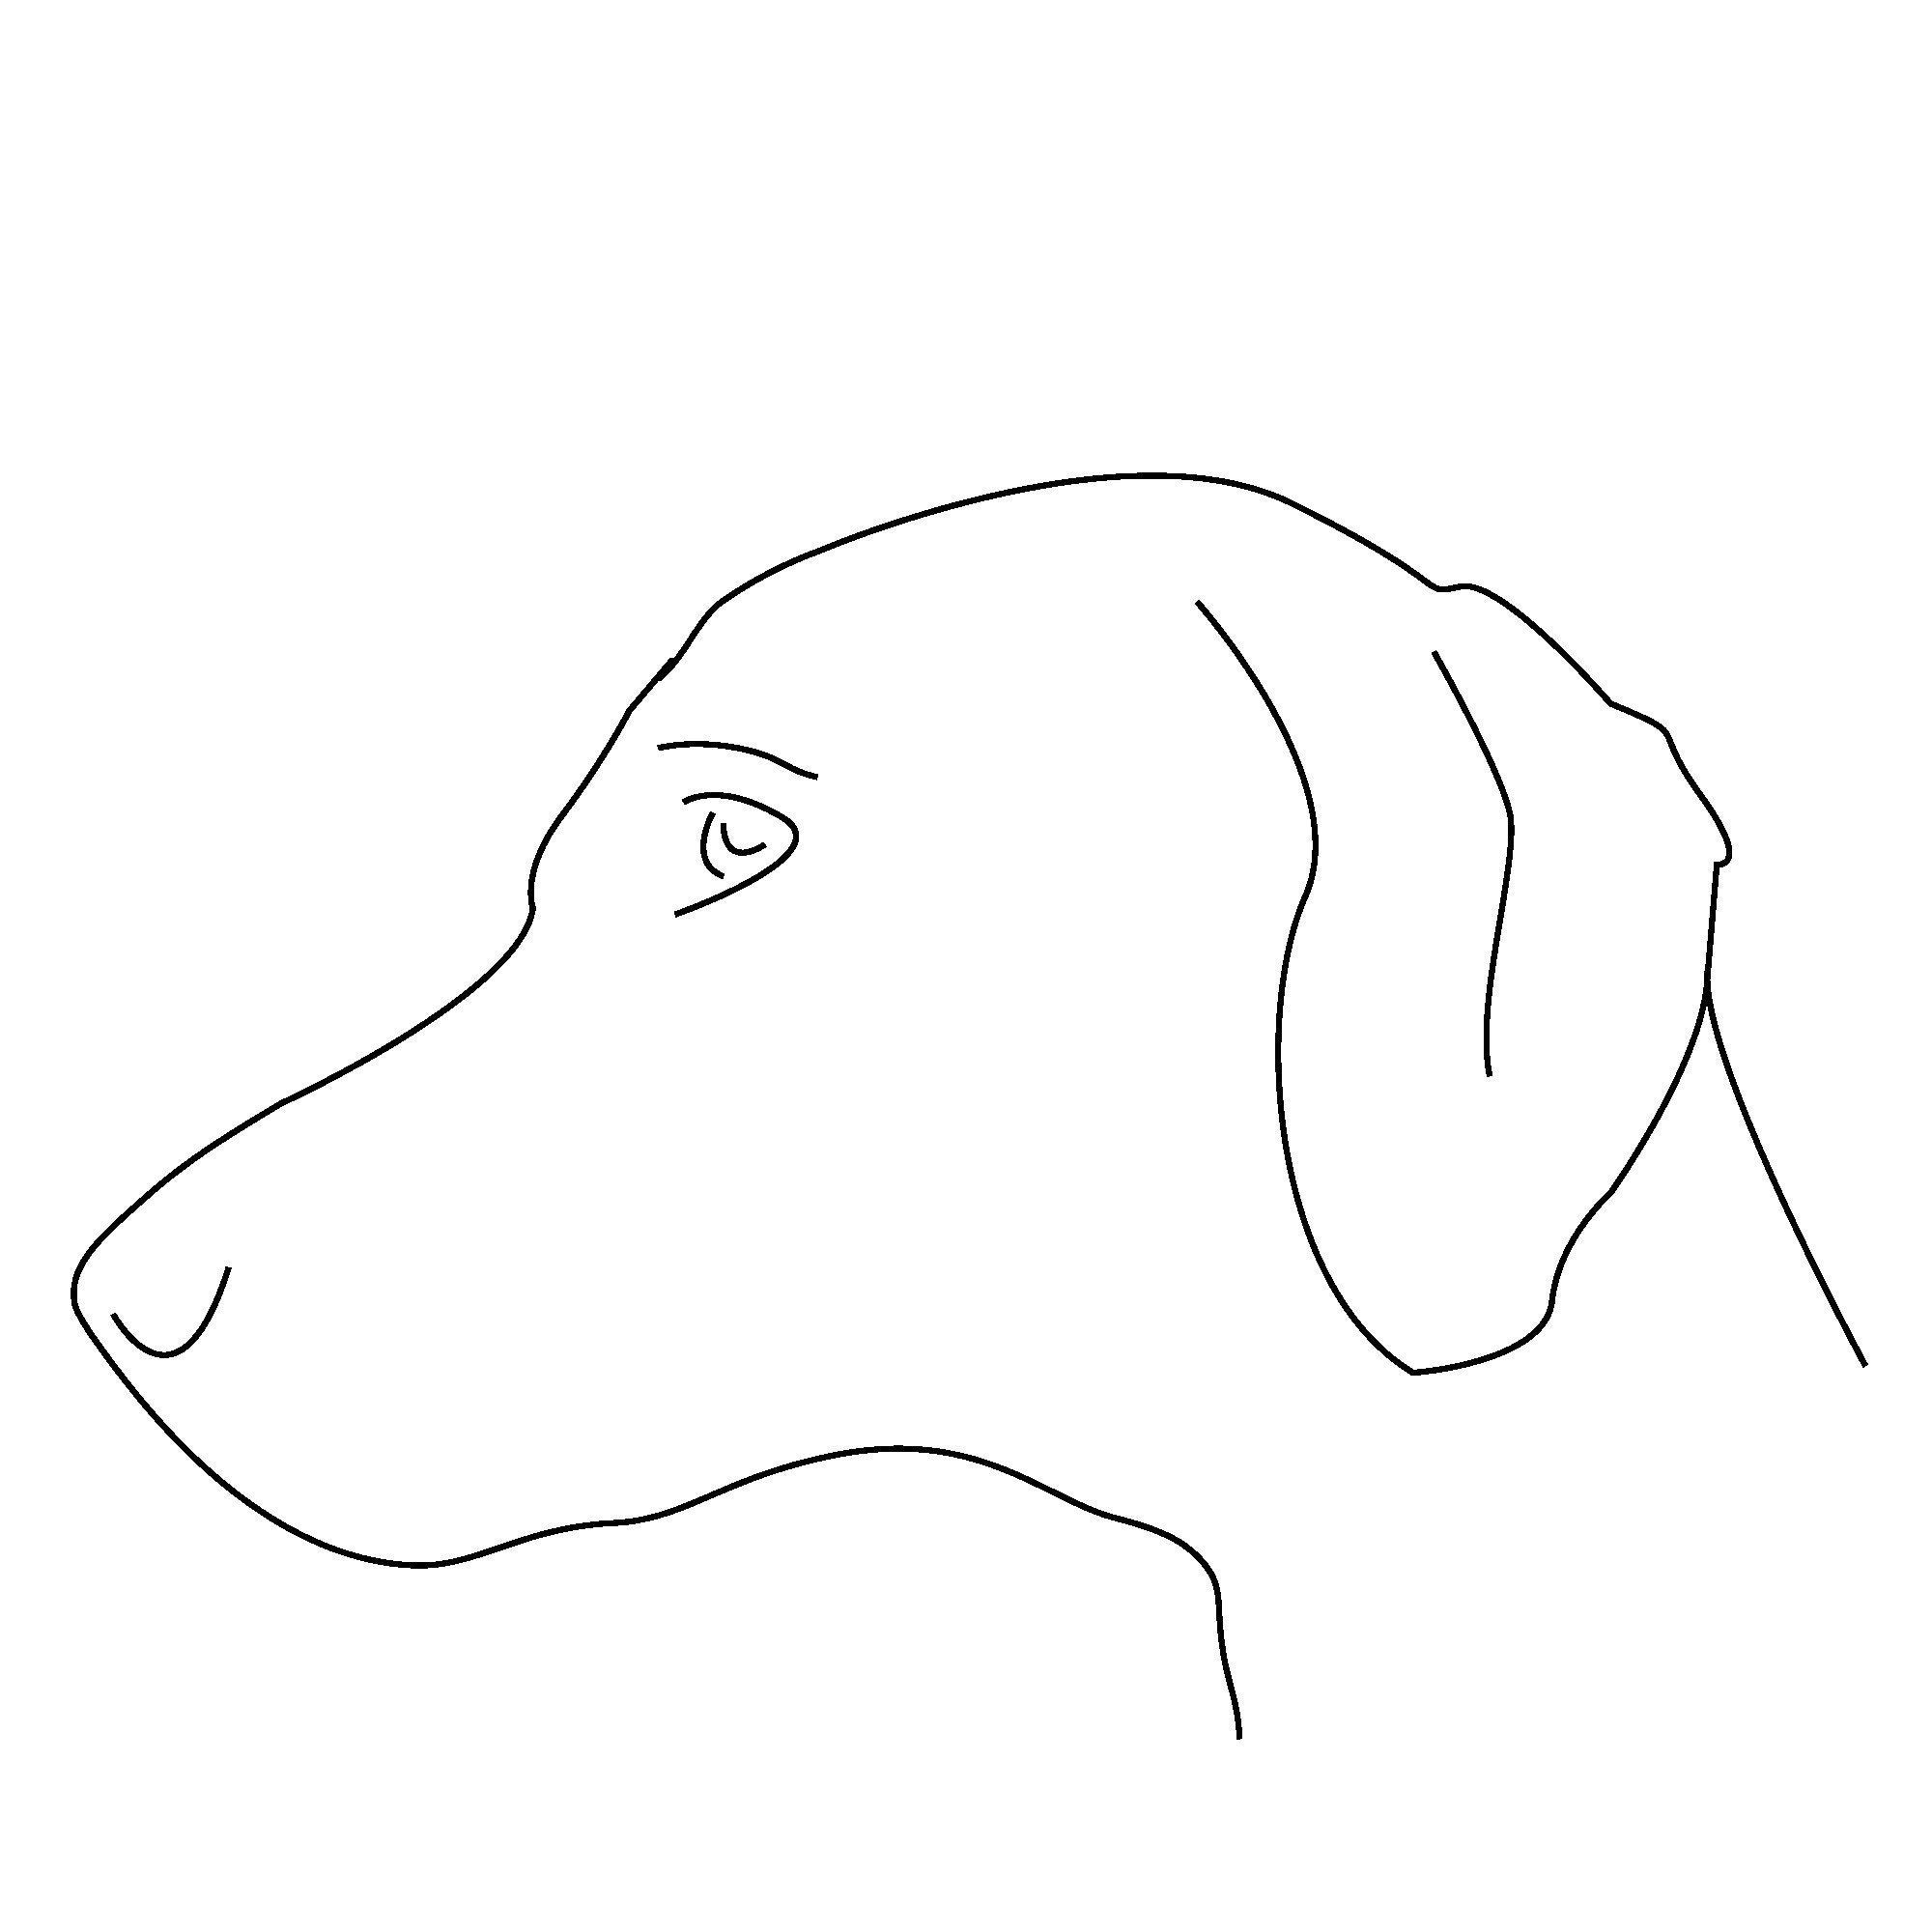 Digital Download: Weimaraner Dog Head Graphic/ Outline available as a  Vector or PNG file. Minimalist Design.